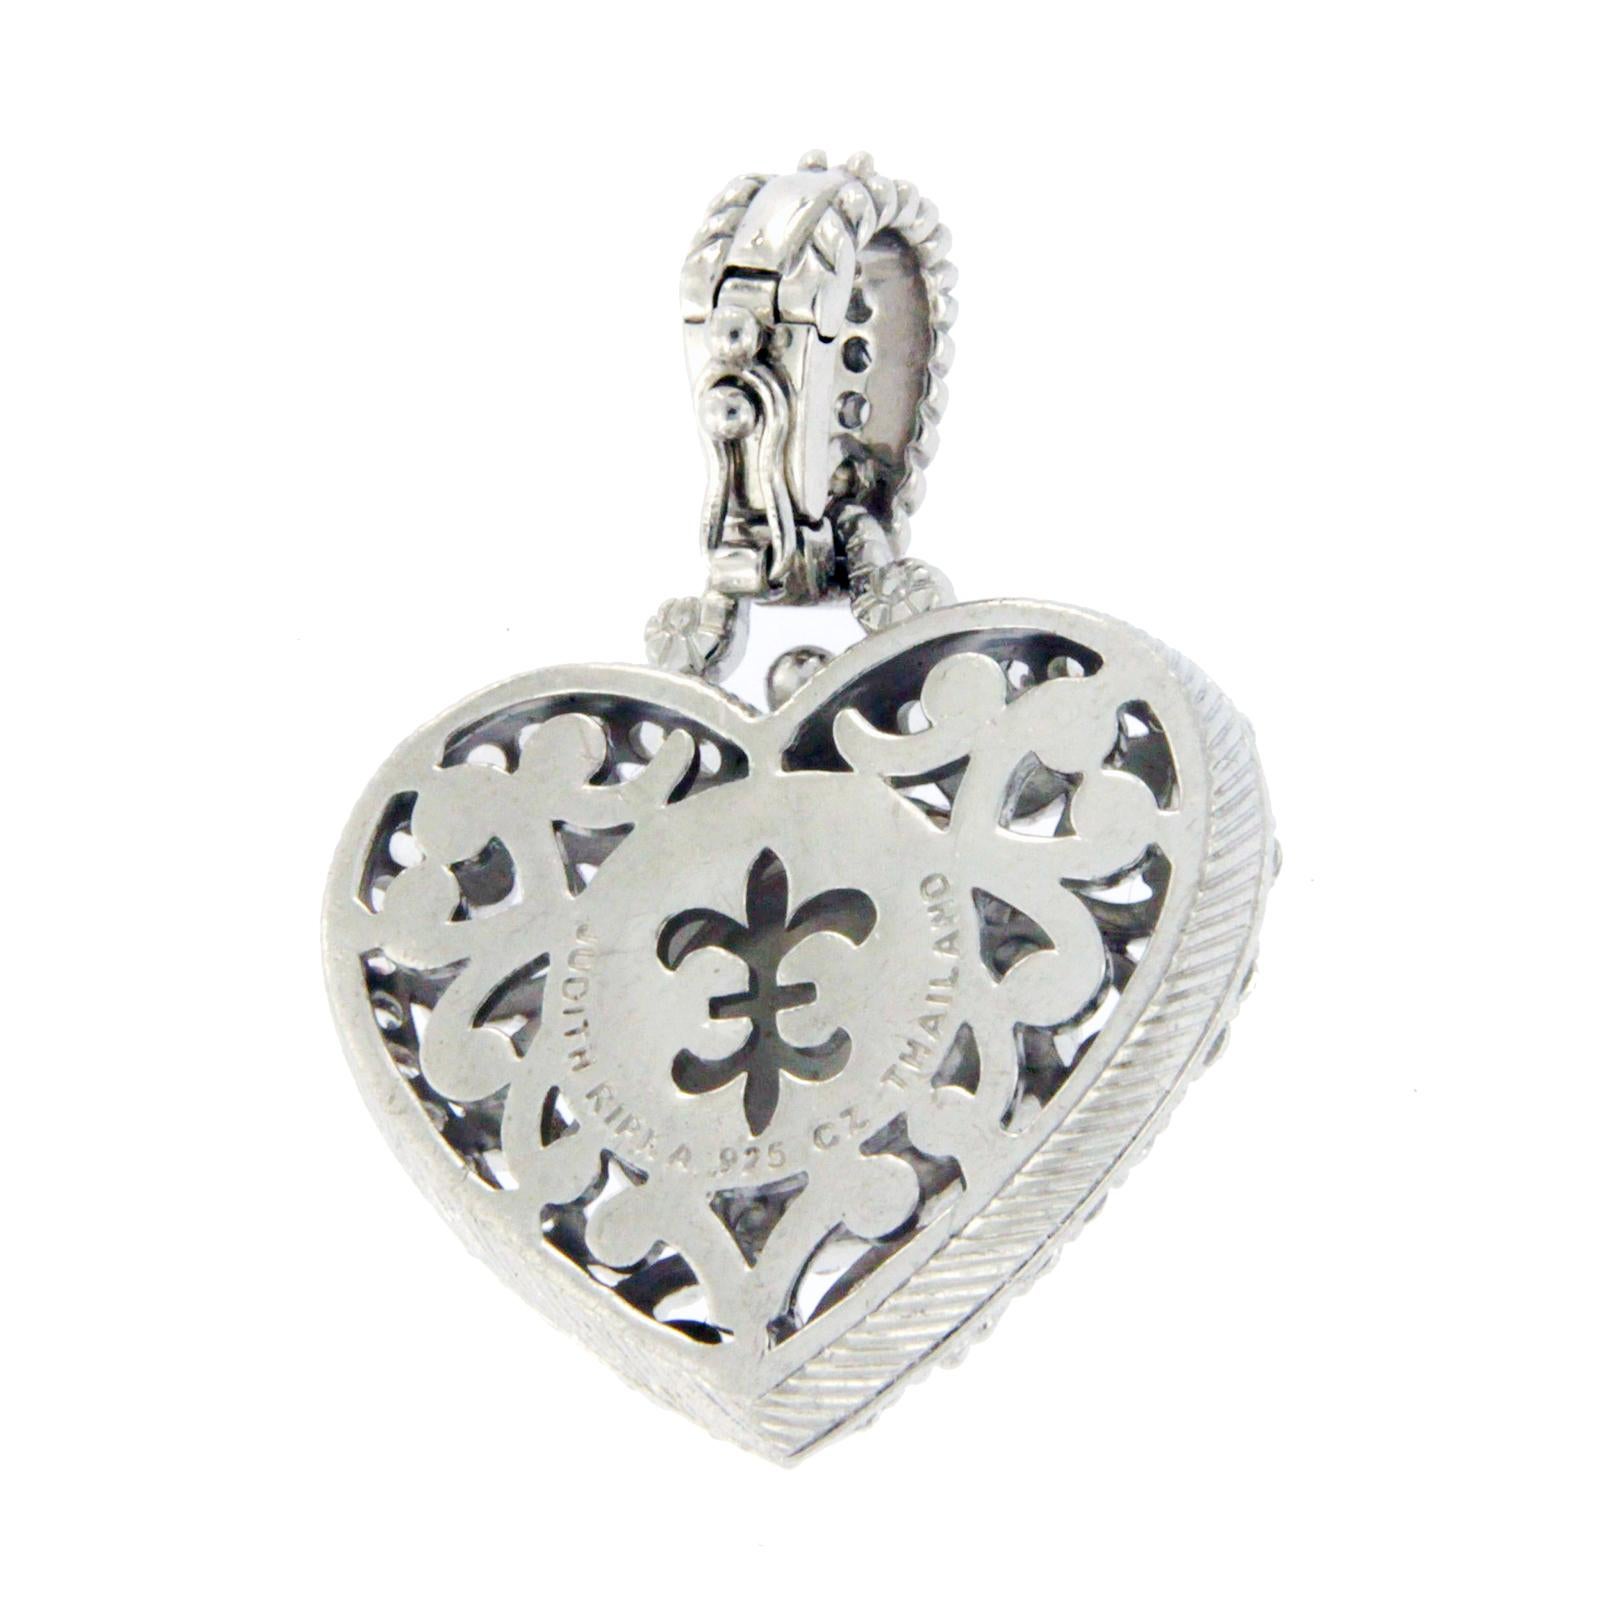 Height: 40 mm
Width: 27.5 mm
Metal: 925 Sterling Silver
Stone Type: Diamonique
Hallmark: Judith Ripka 925
Total Weight: 13.7 Grams
Condition: Pre Owned
Estimated Retail Price: $390
Stock Number: U119